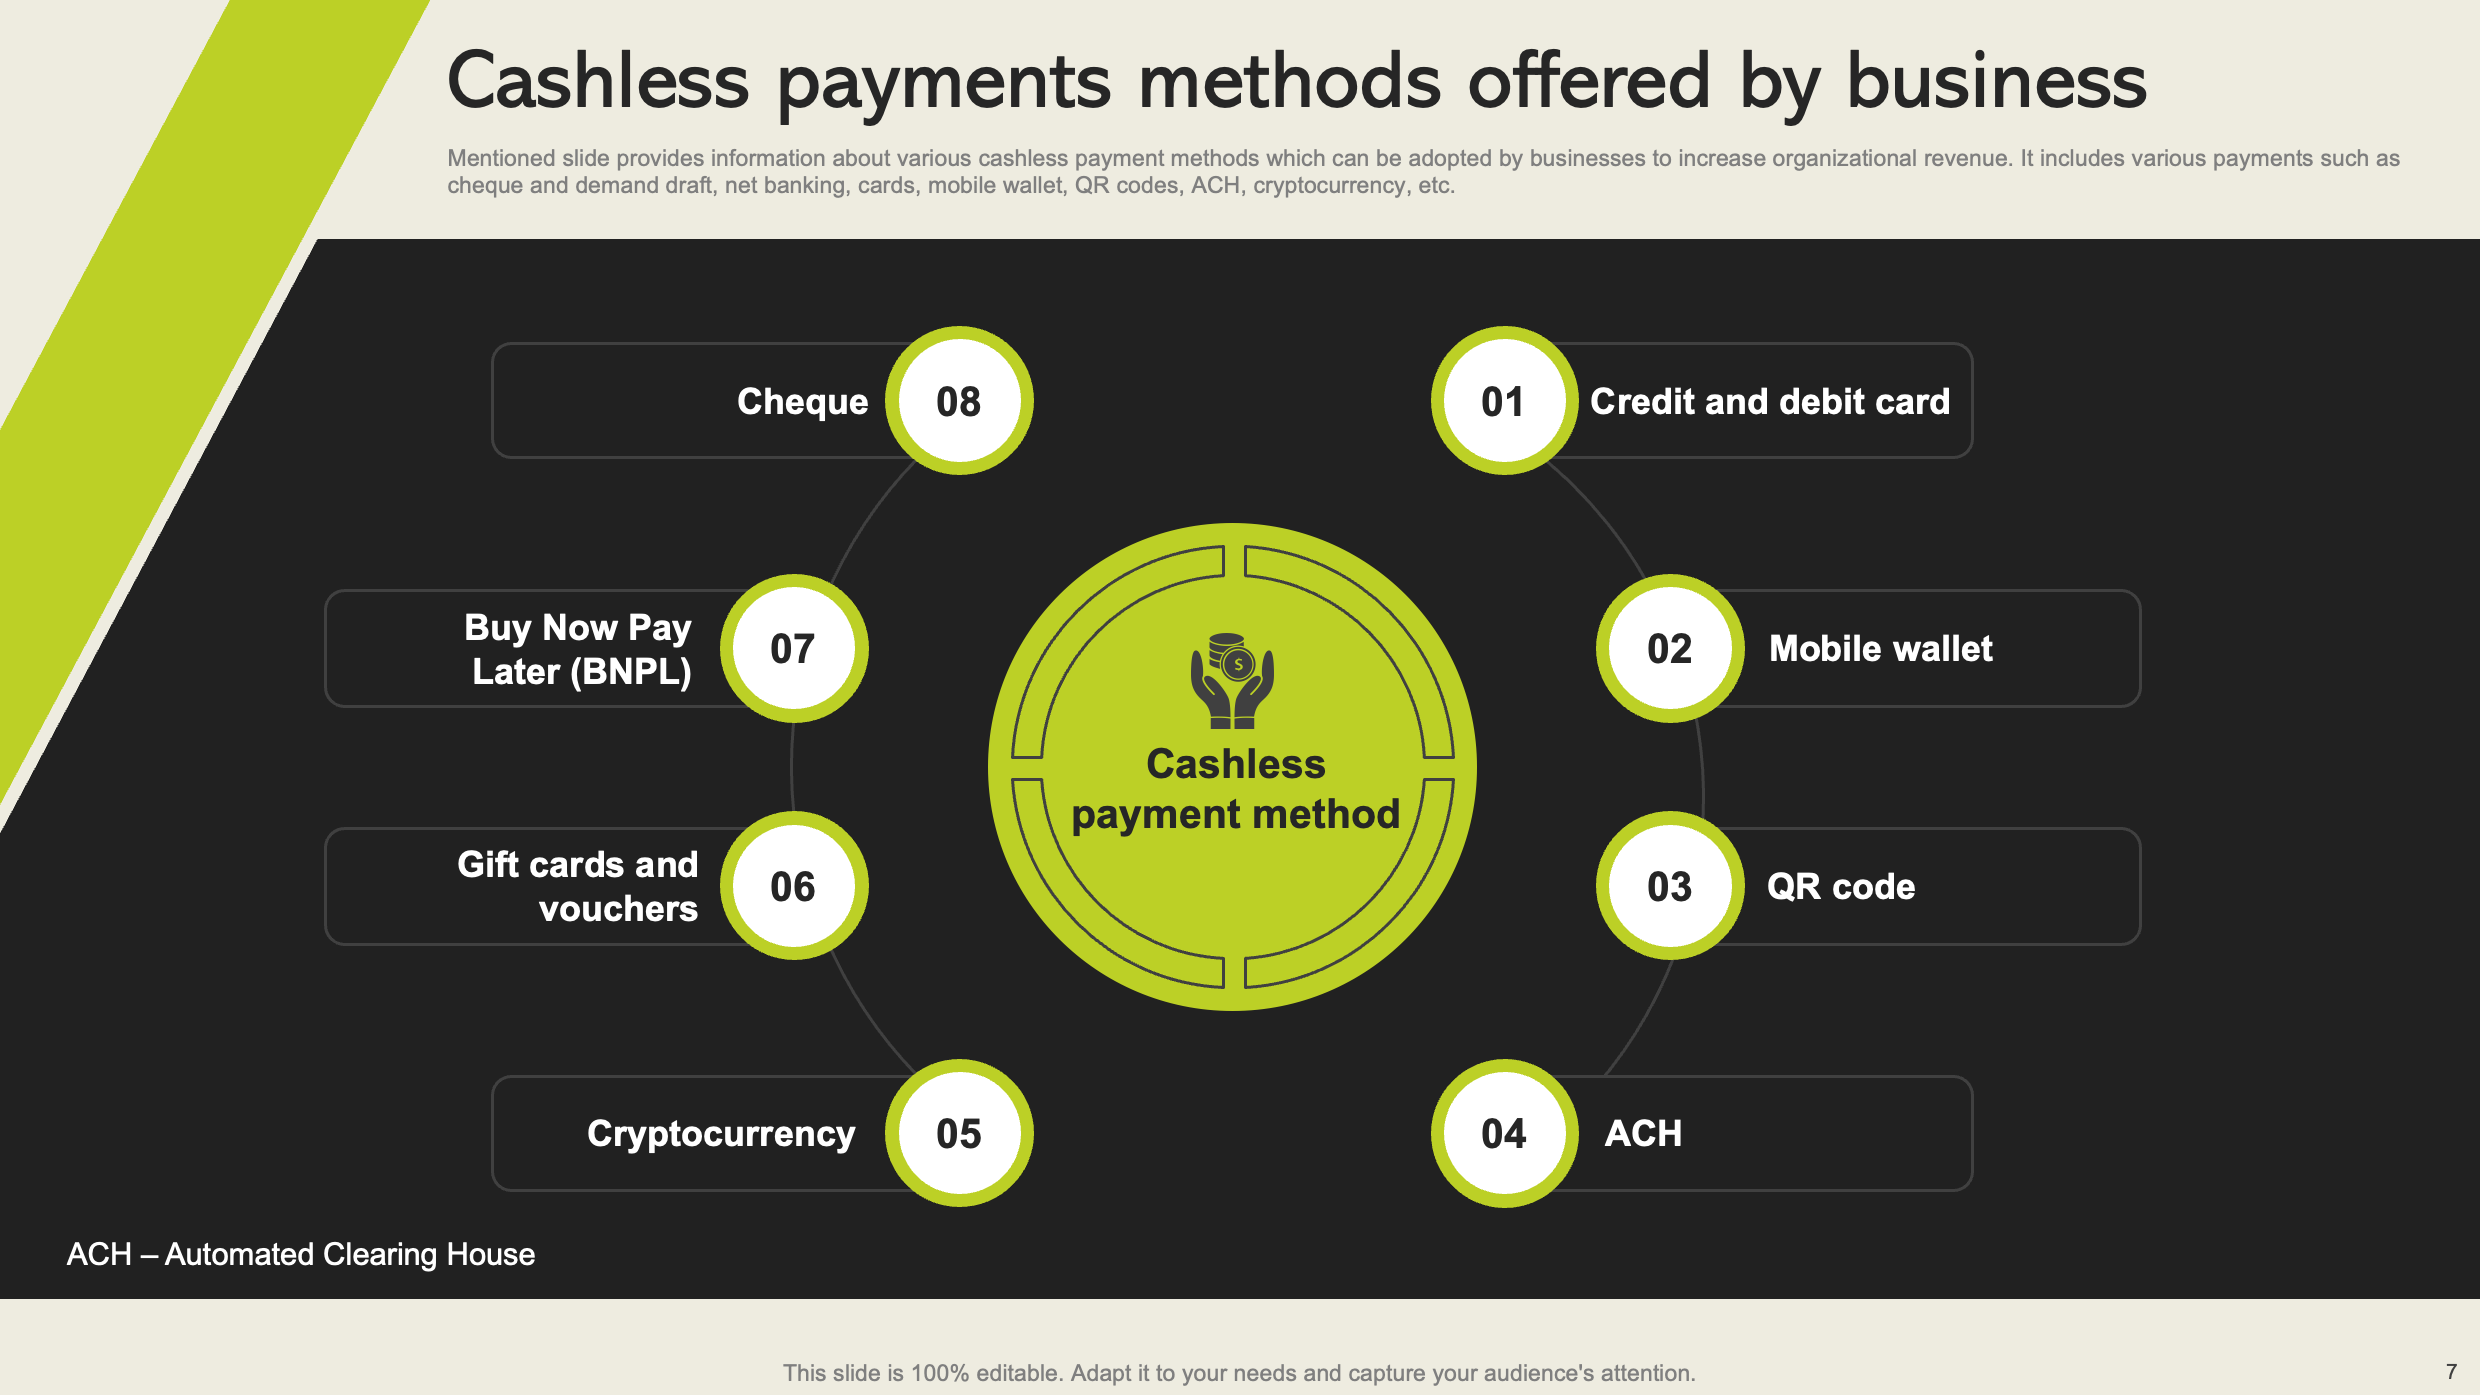 Cashless payments methods offered by business 